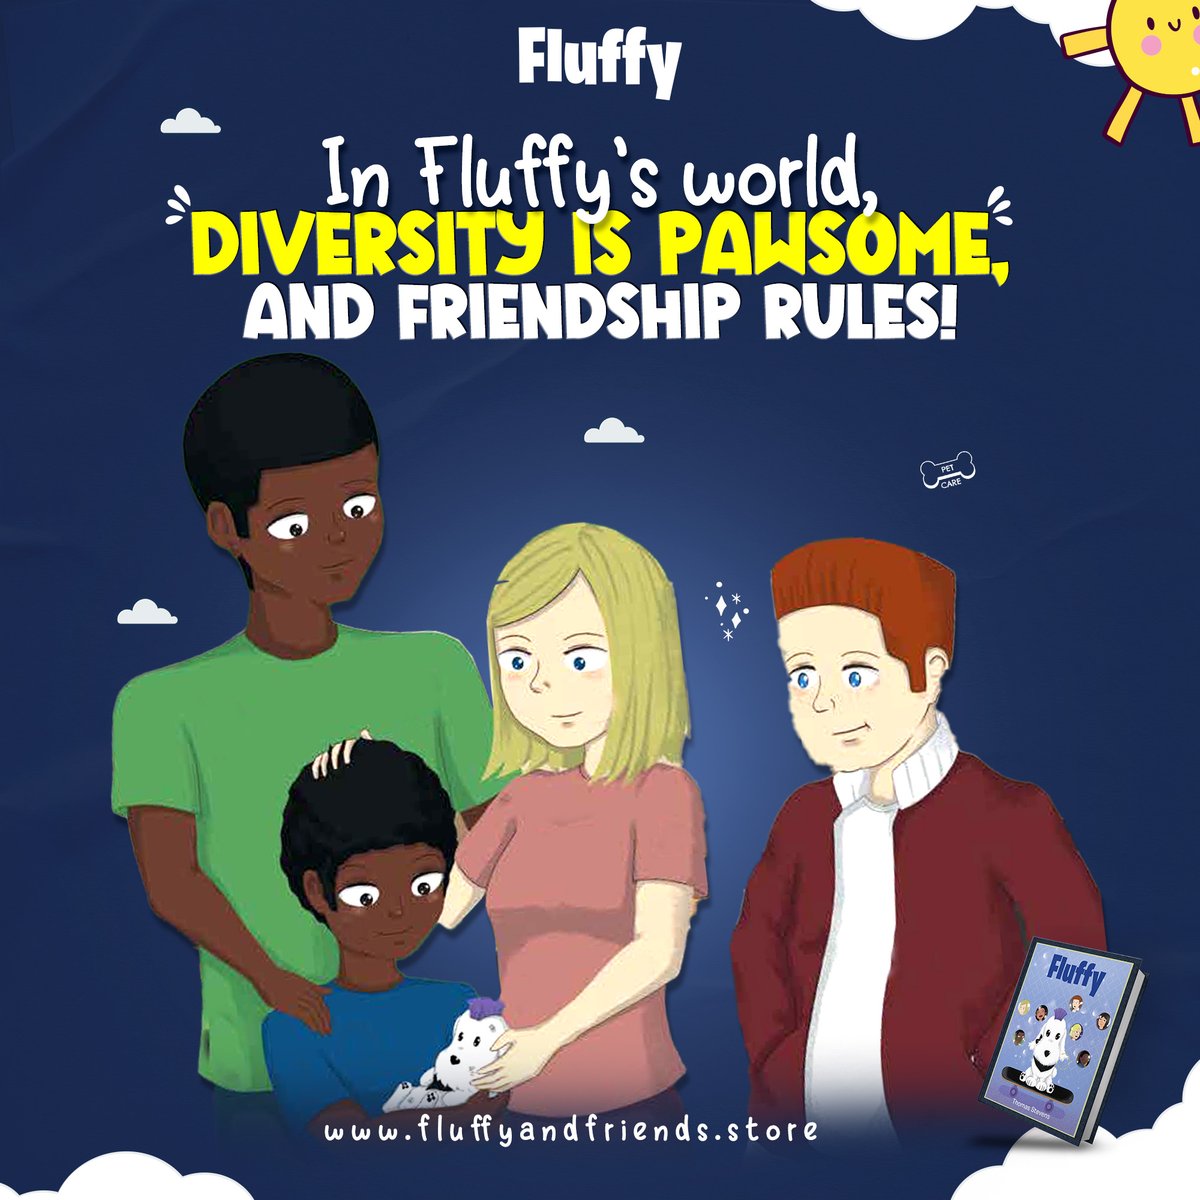 Fluffy's world: Where tails tell the tale! Dive into this paw-some world, where different breeds and backgrounds come together in harmony. Bark up our tree today! amzn.com/1662454406/ #Fluffy #FluffyAndFriends #inclusivity #diversity #ilovebooks #books #childrensbook